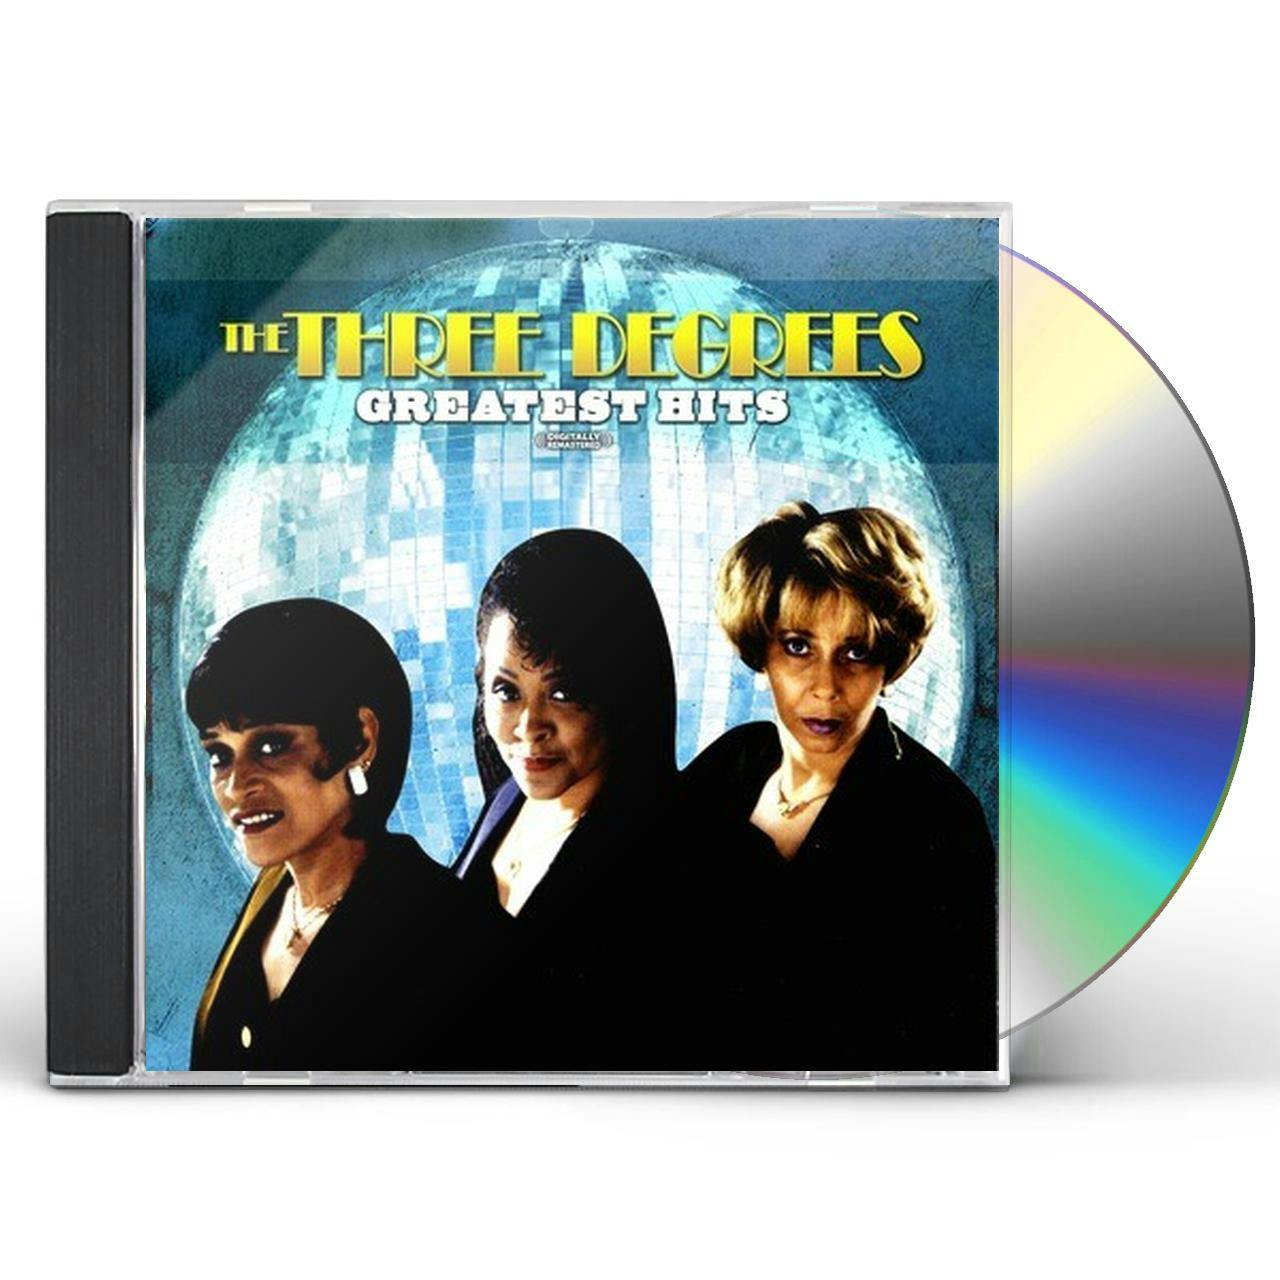 The Three Degrees GREATEST HITS CD